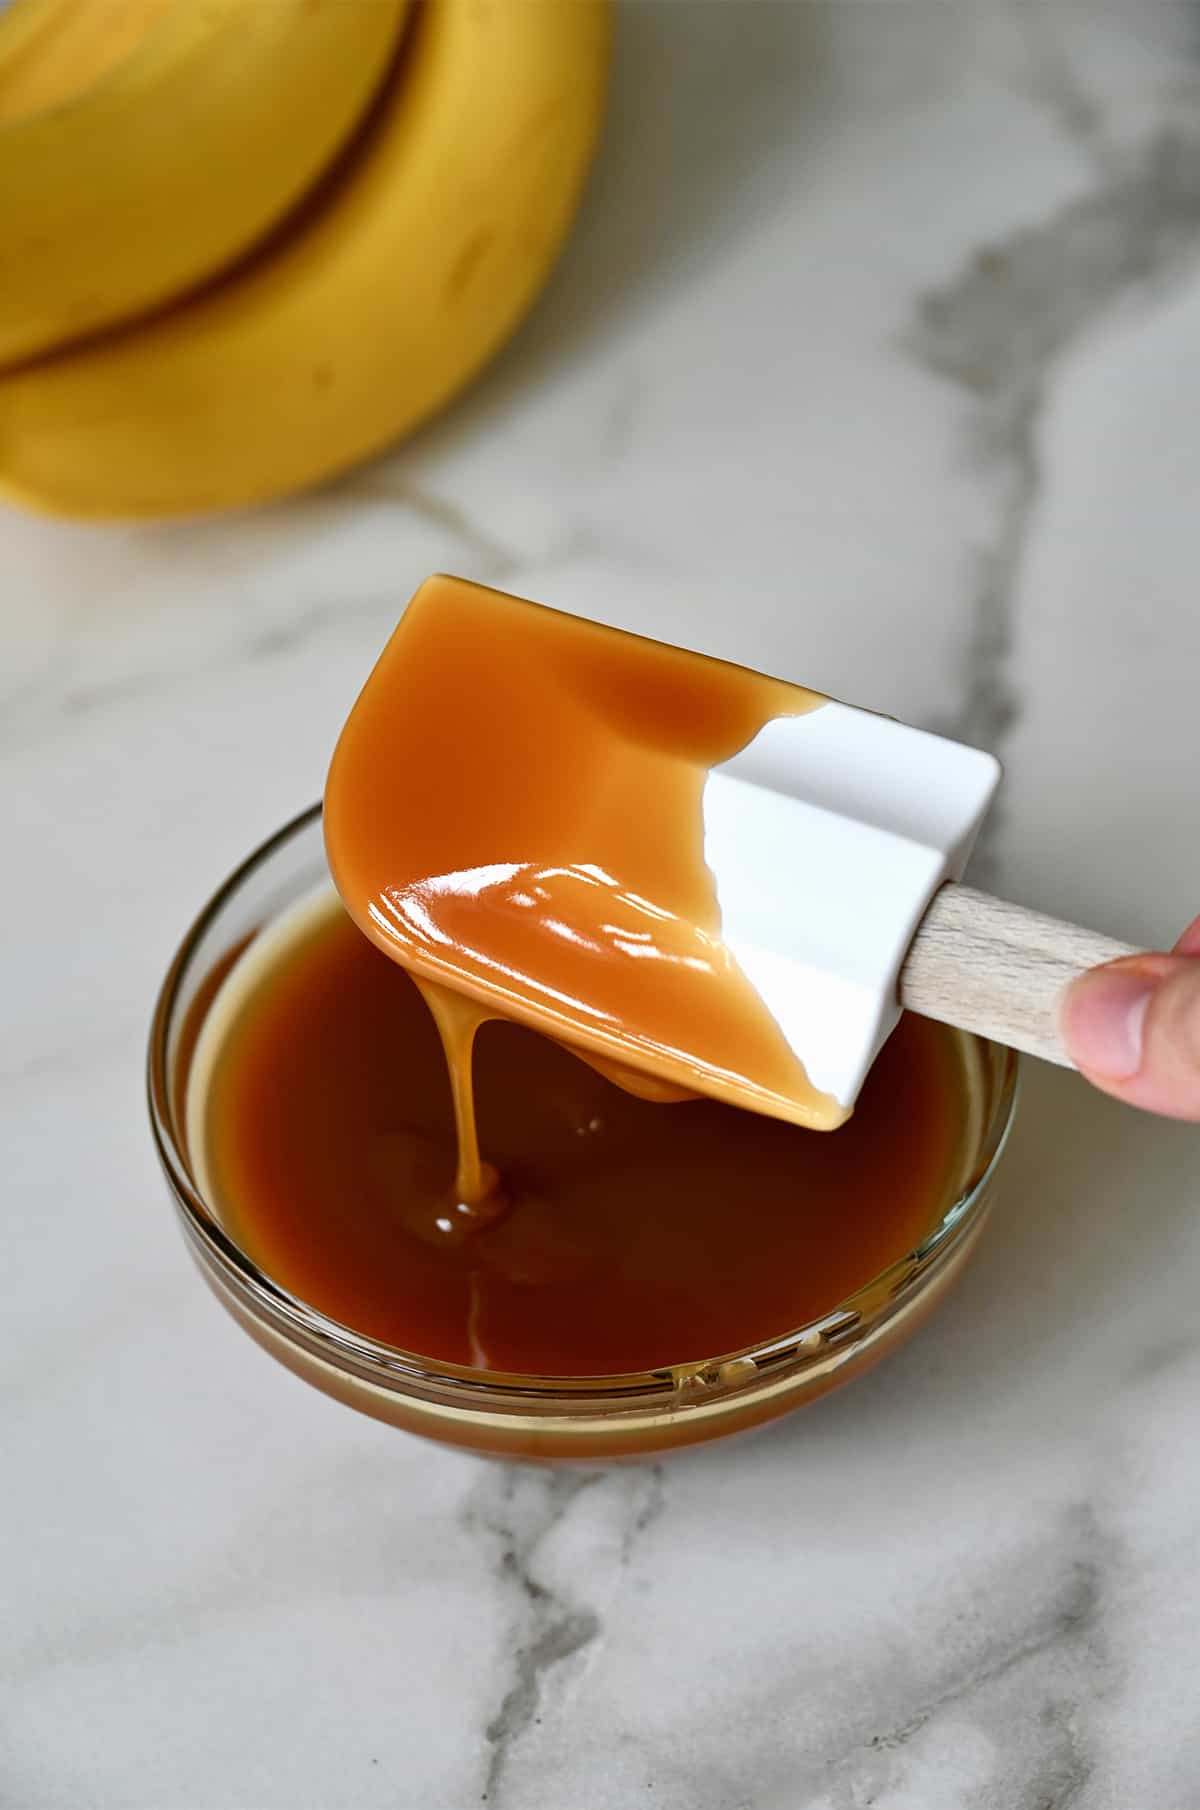 A spatula covered in salted caramel sauce over a small bowl filled with sauce.